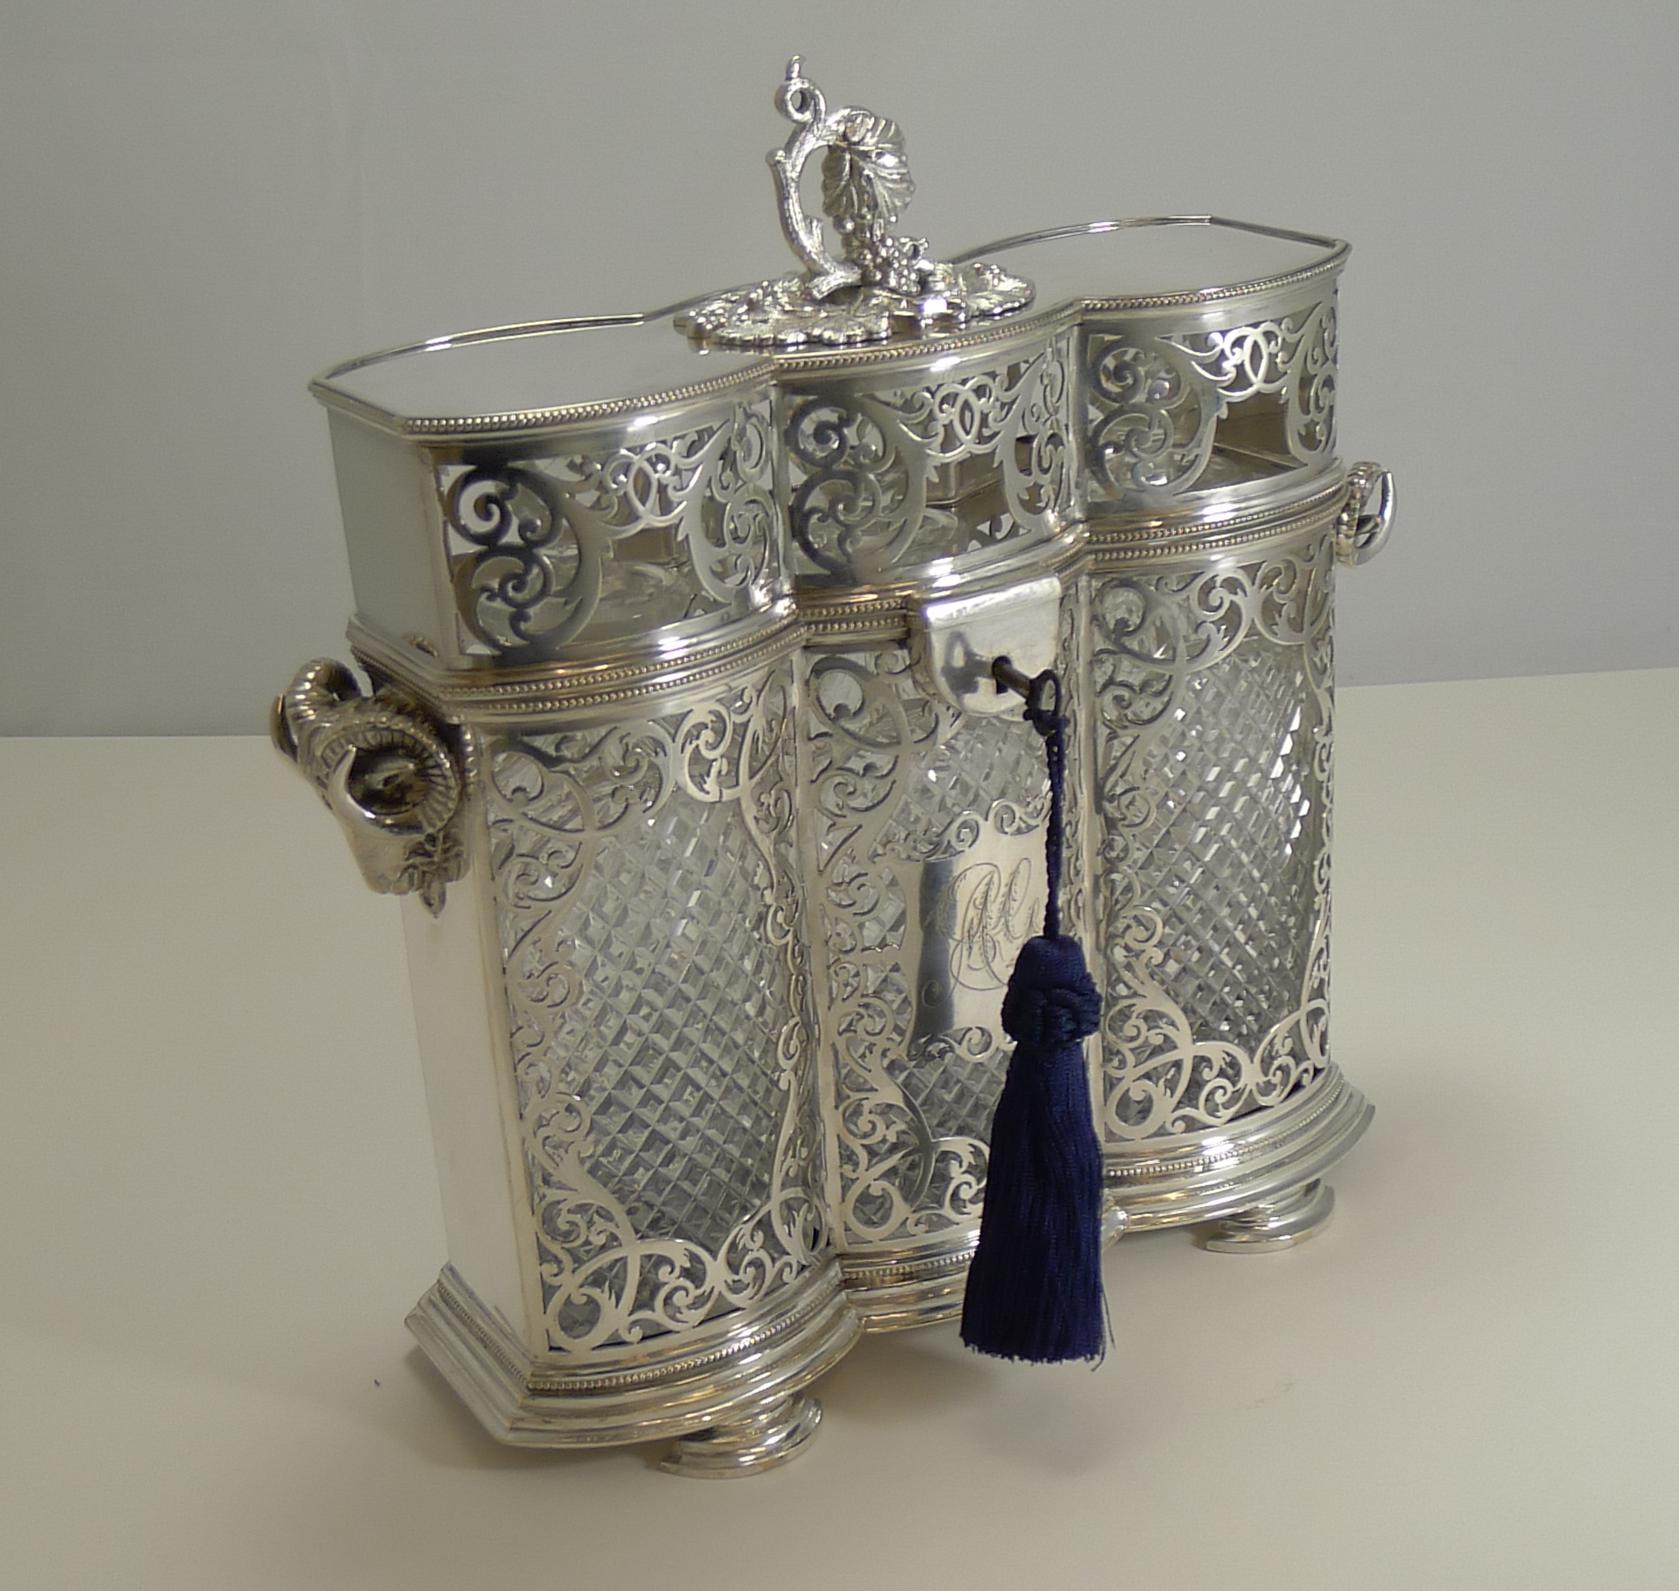 Heirloom Quality Three Bottle Decanter Box or Tantalus by Philip Ashberry In Good Condition For Sale In Bath, GB